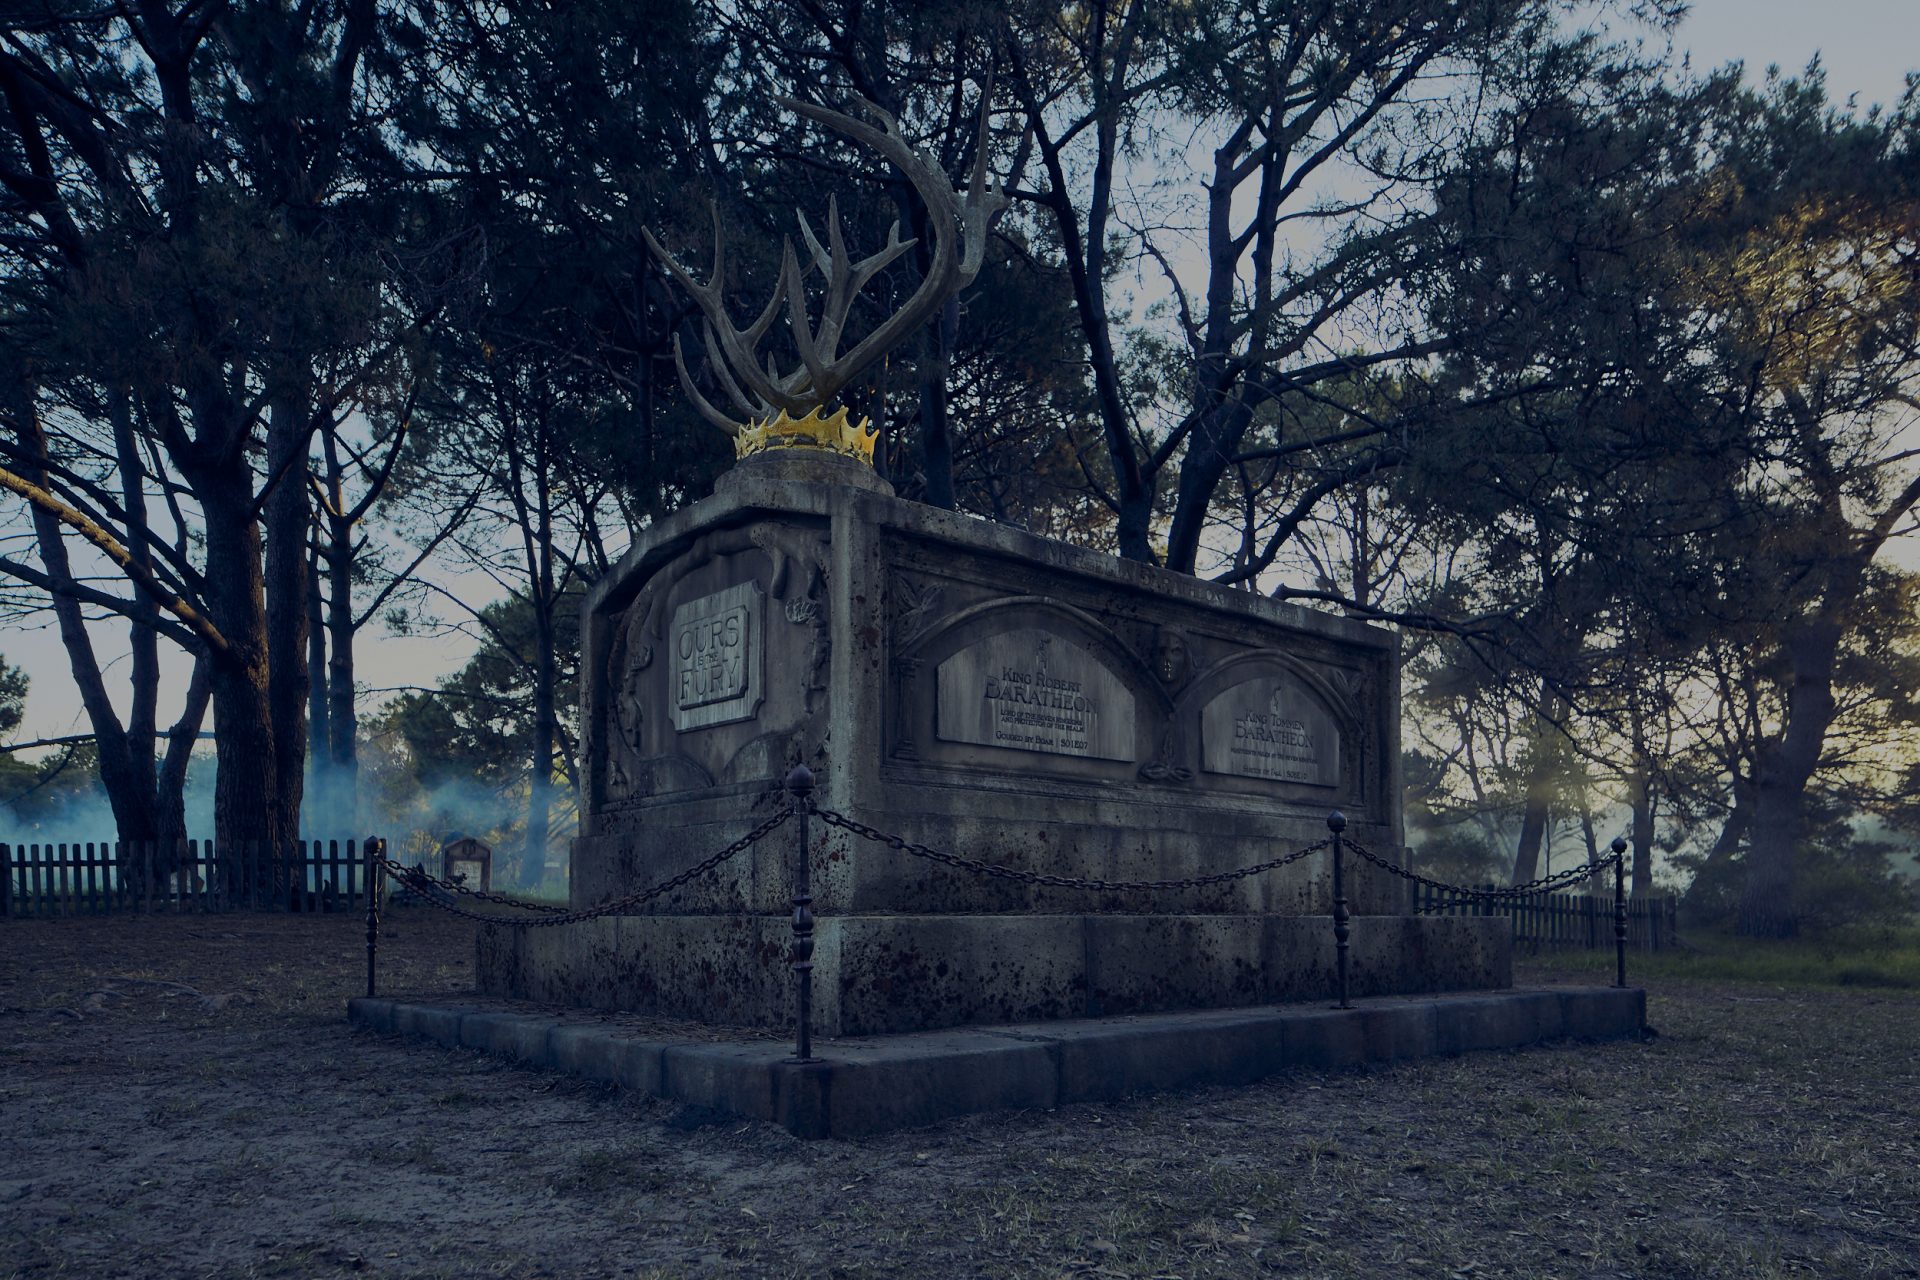 Game of Thrones Grave - Baratheon Mausoleum - by The Glue Society